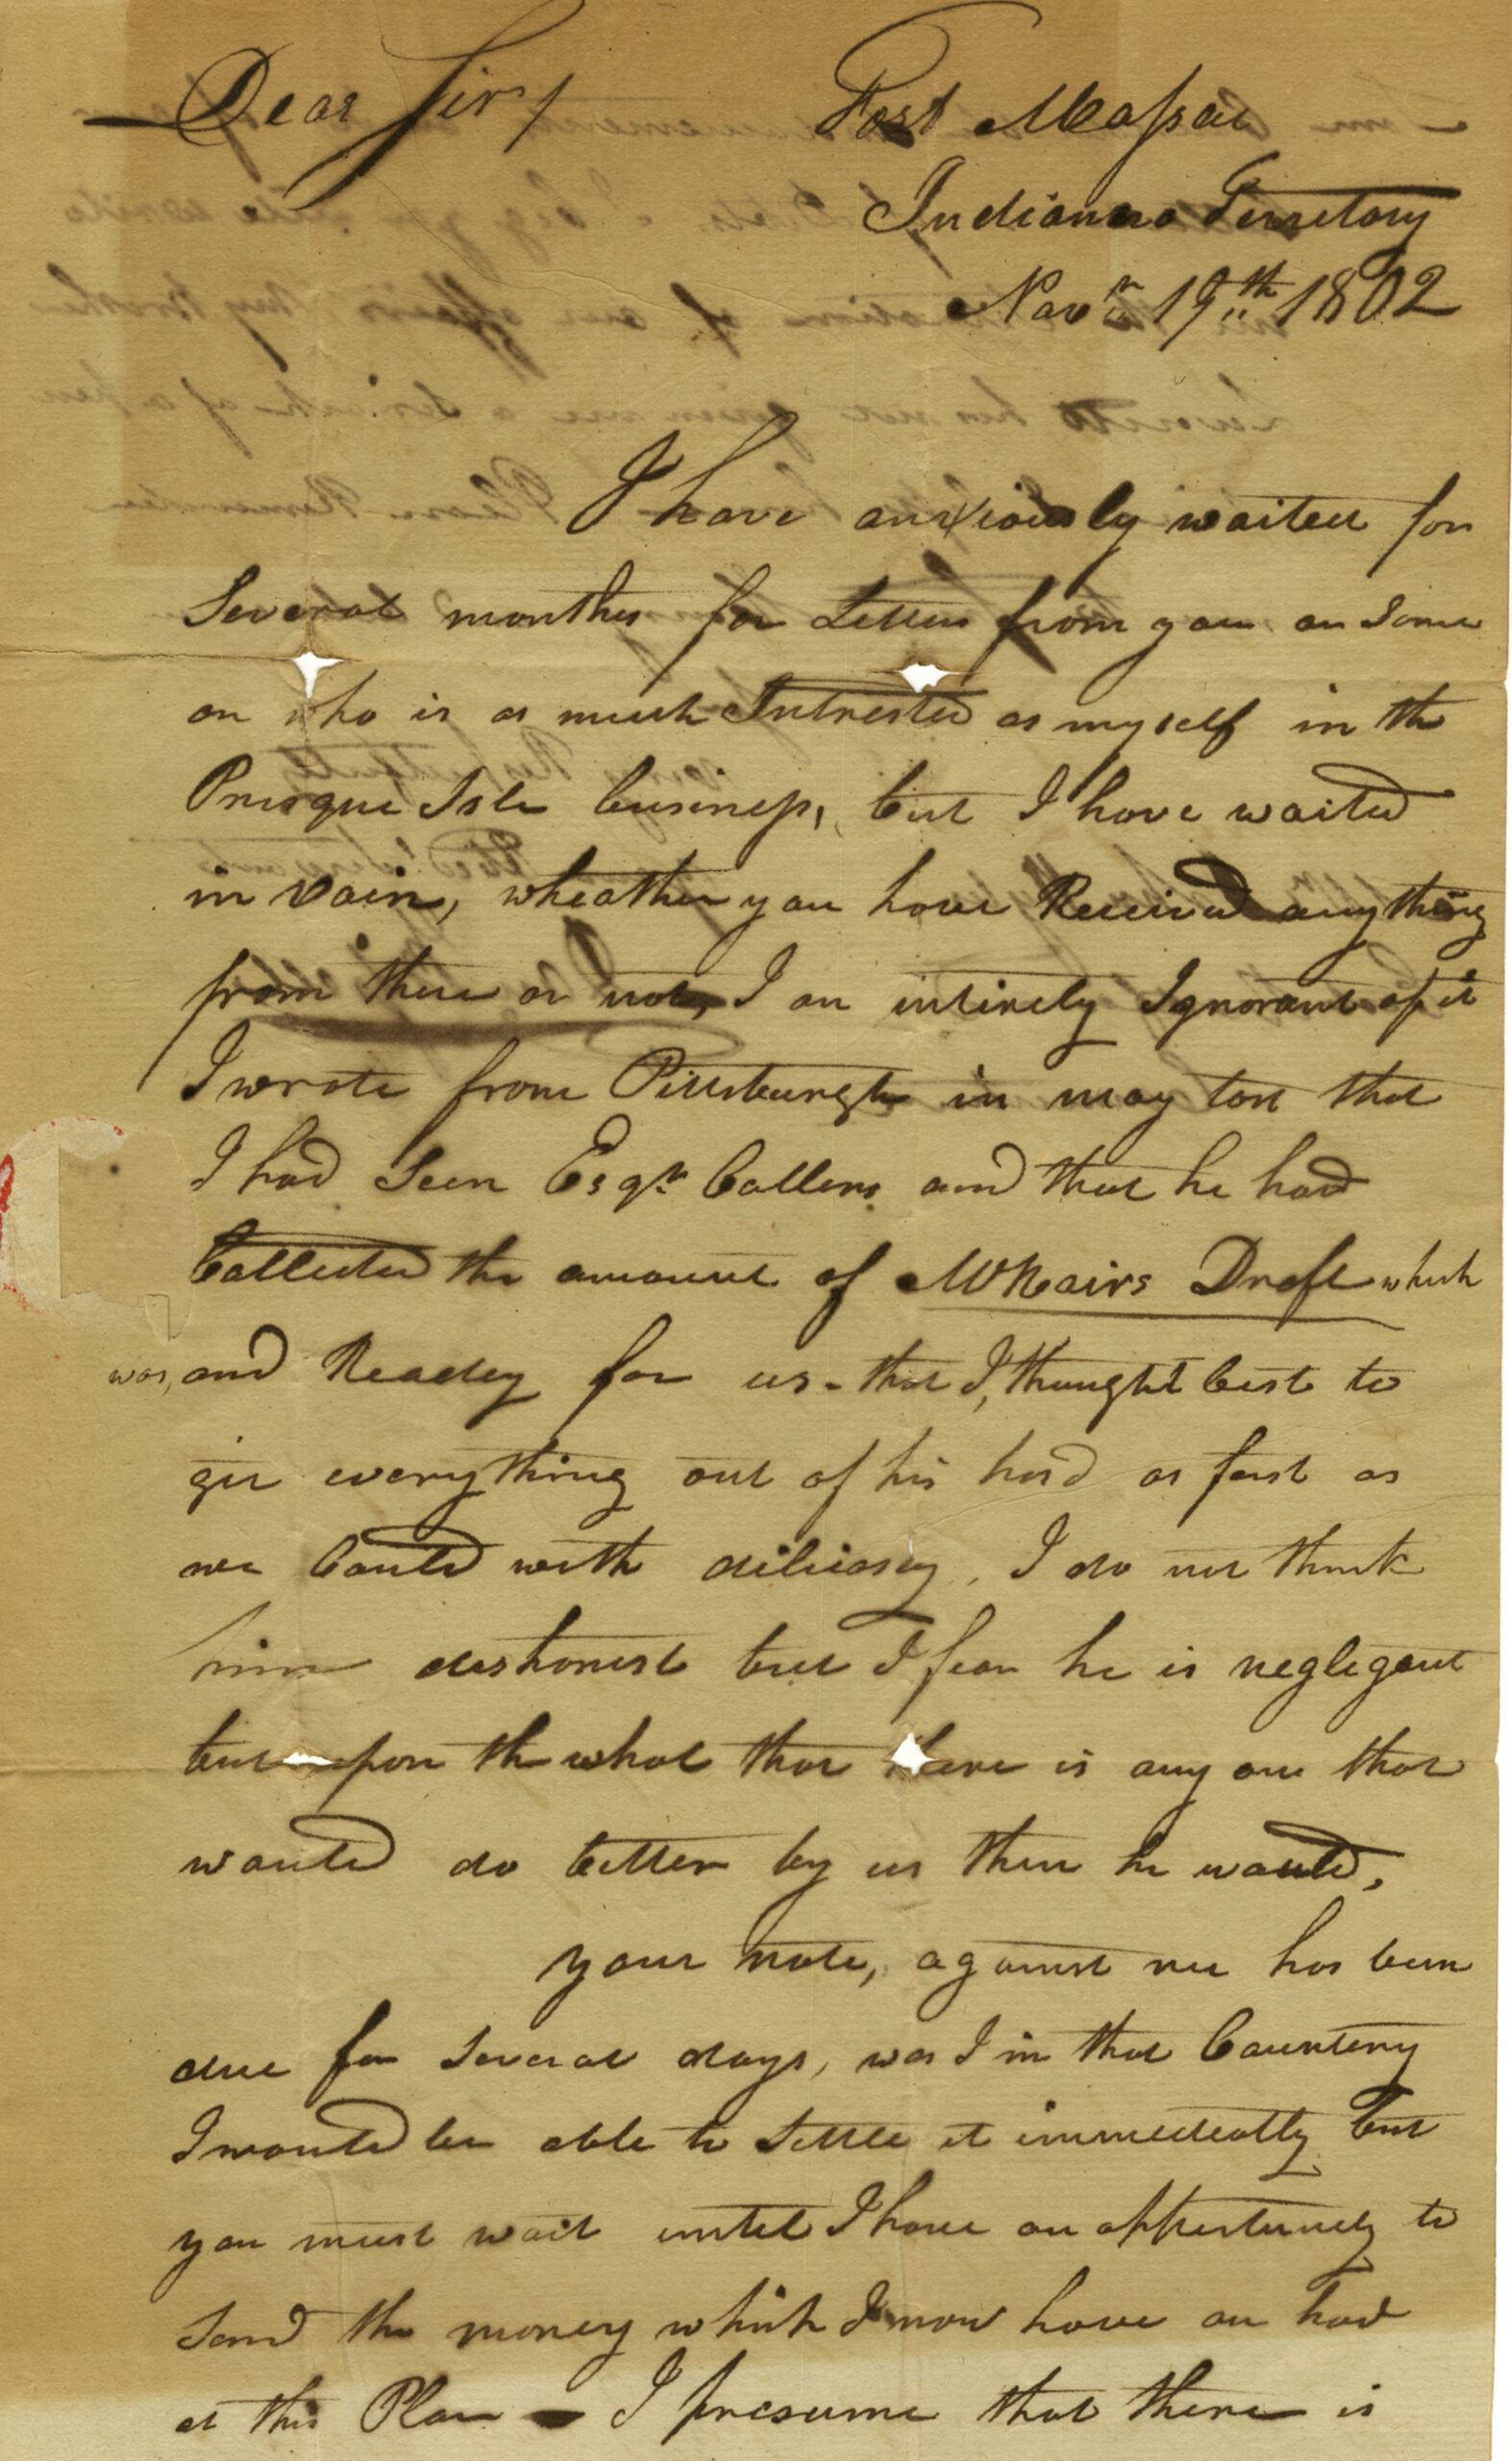 1802/11/19 Letter from Daniel Bissell to John Wyles, Sr.